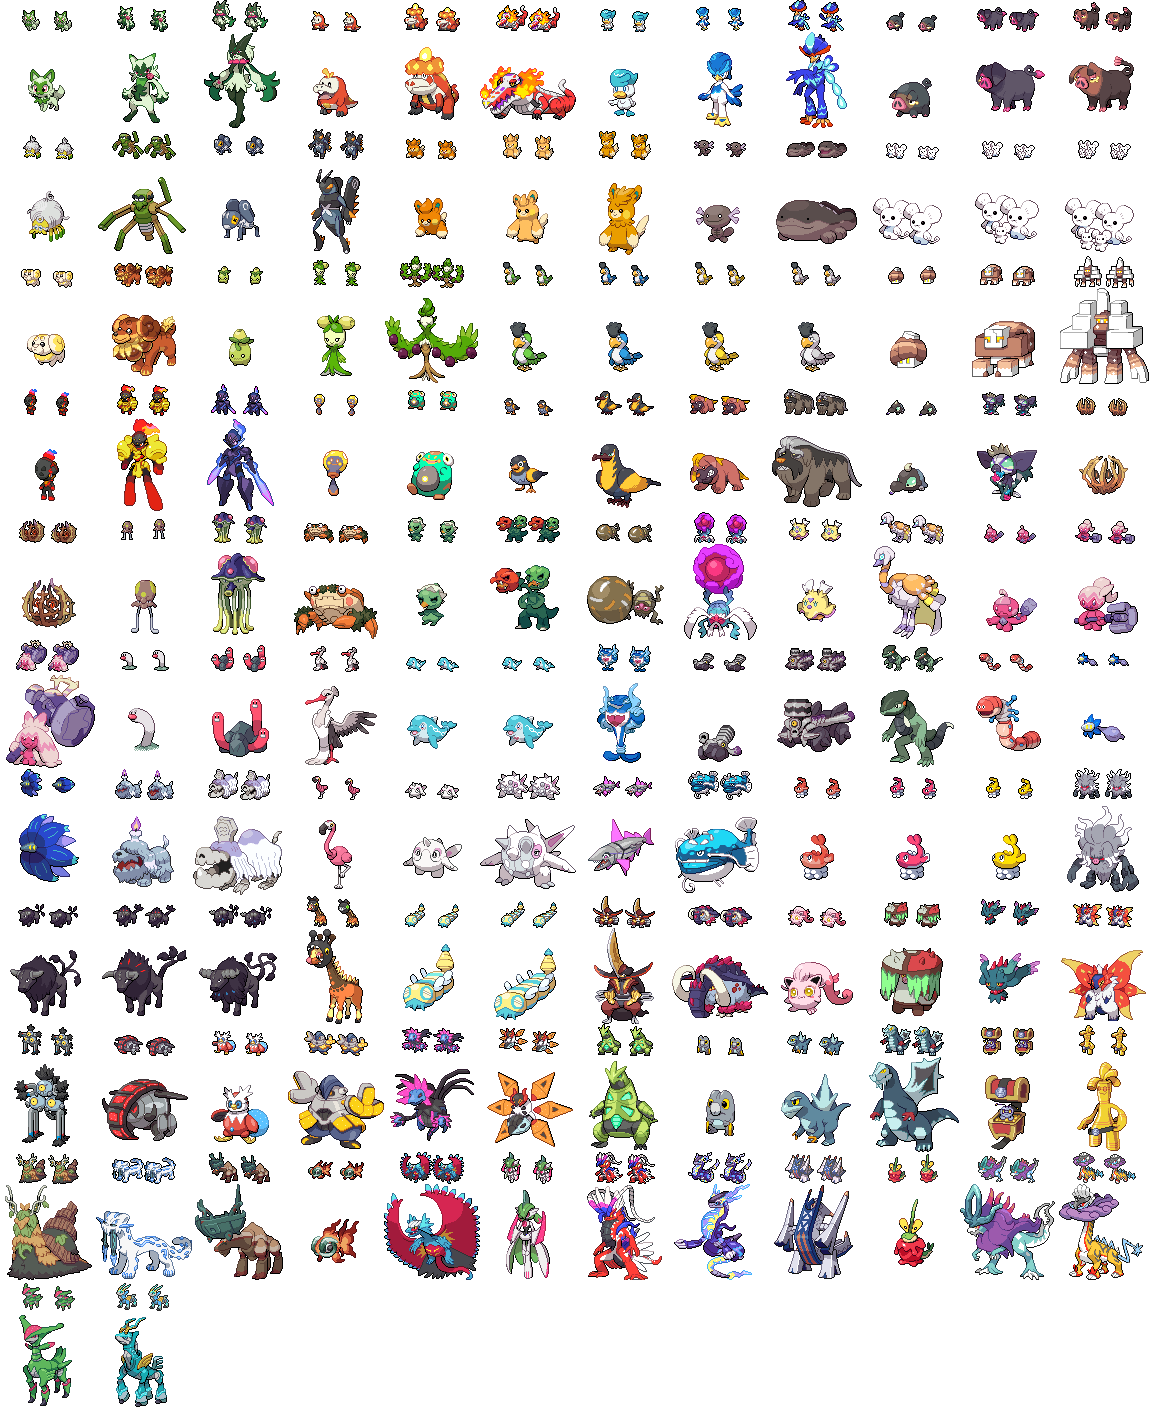 Pokemon Scarlet and Violet front and icon sprites by Nolo33LP on DeviantArt